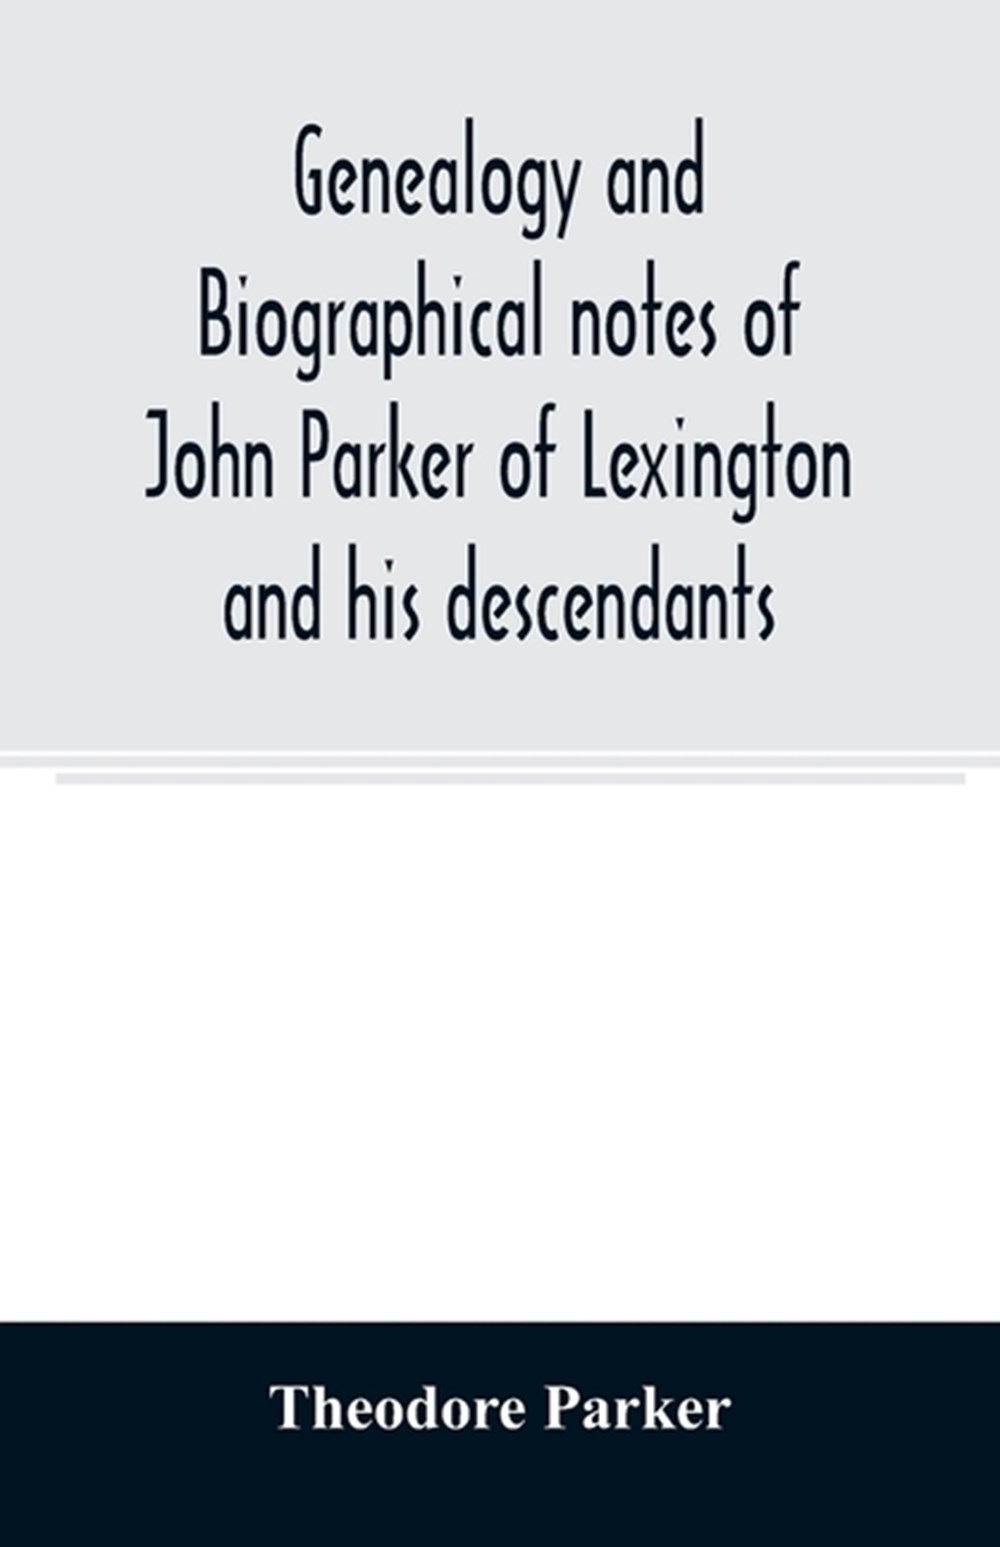 Genealogy and biographical notes of John Parker of Lexington and his descendants. Showing his Earlie